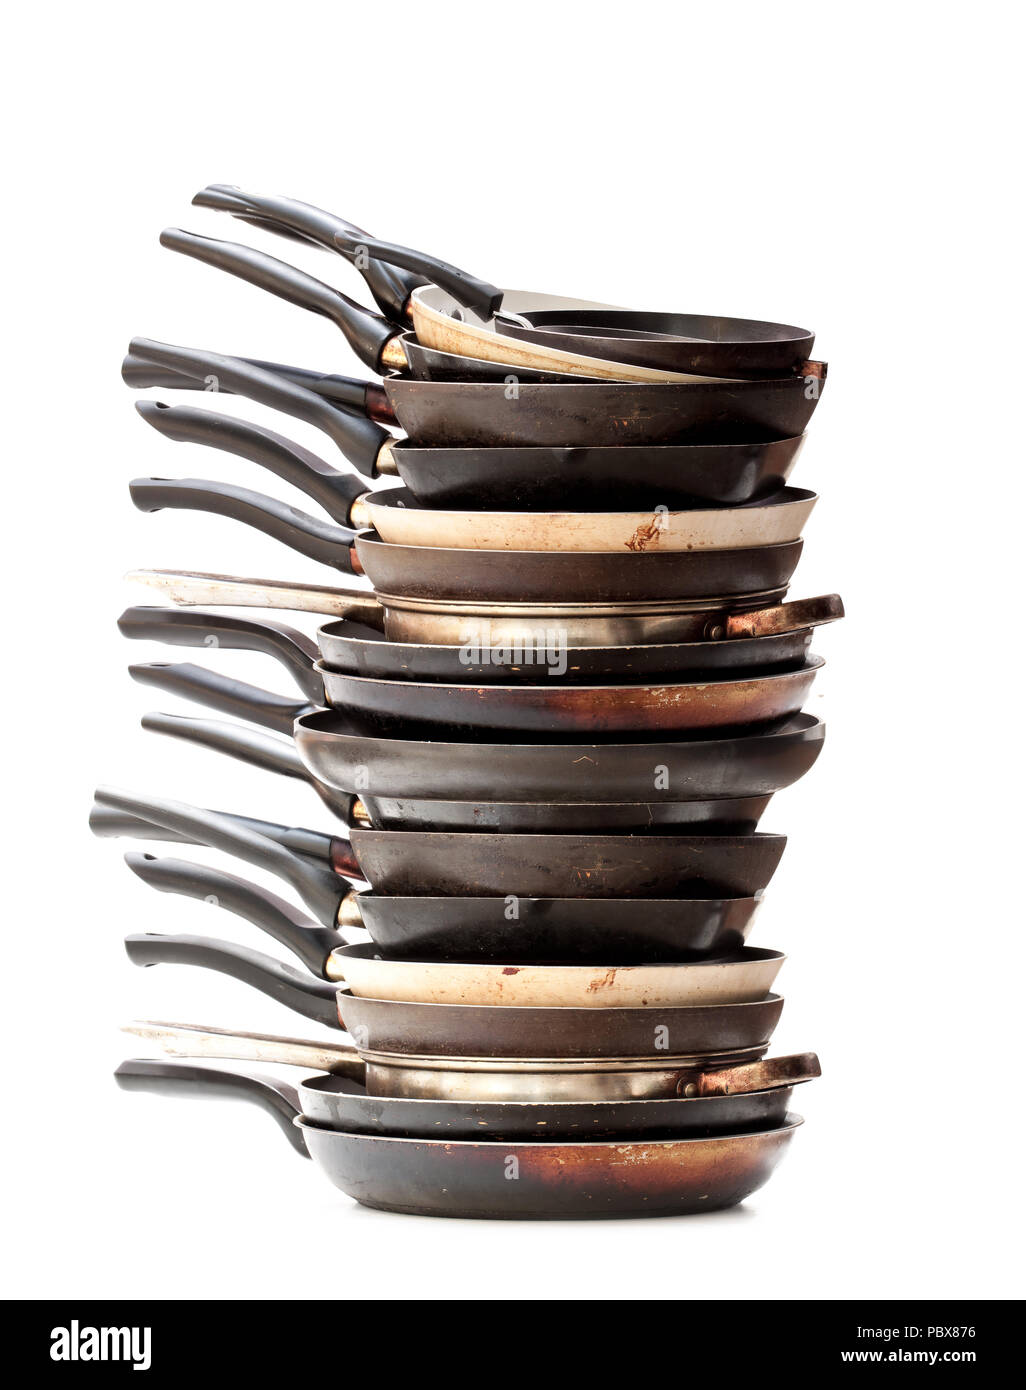 https://c8.alamy.com/comp/PBX876/stack-of-used-frying-pans-isolated-on-white-PBX876.jpg